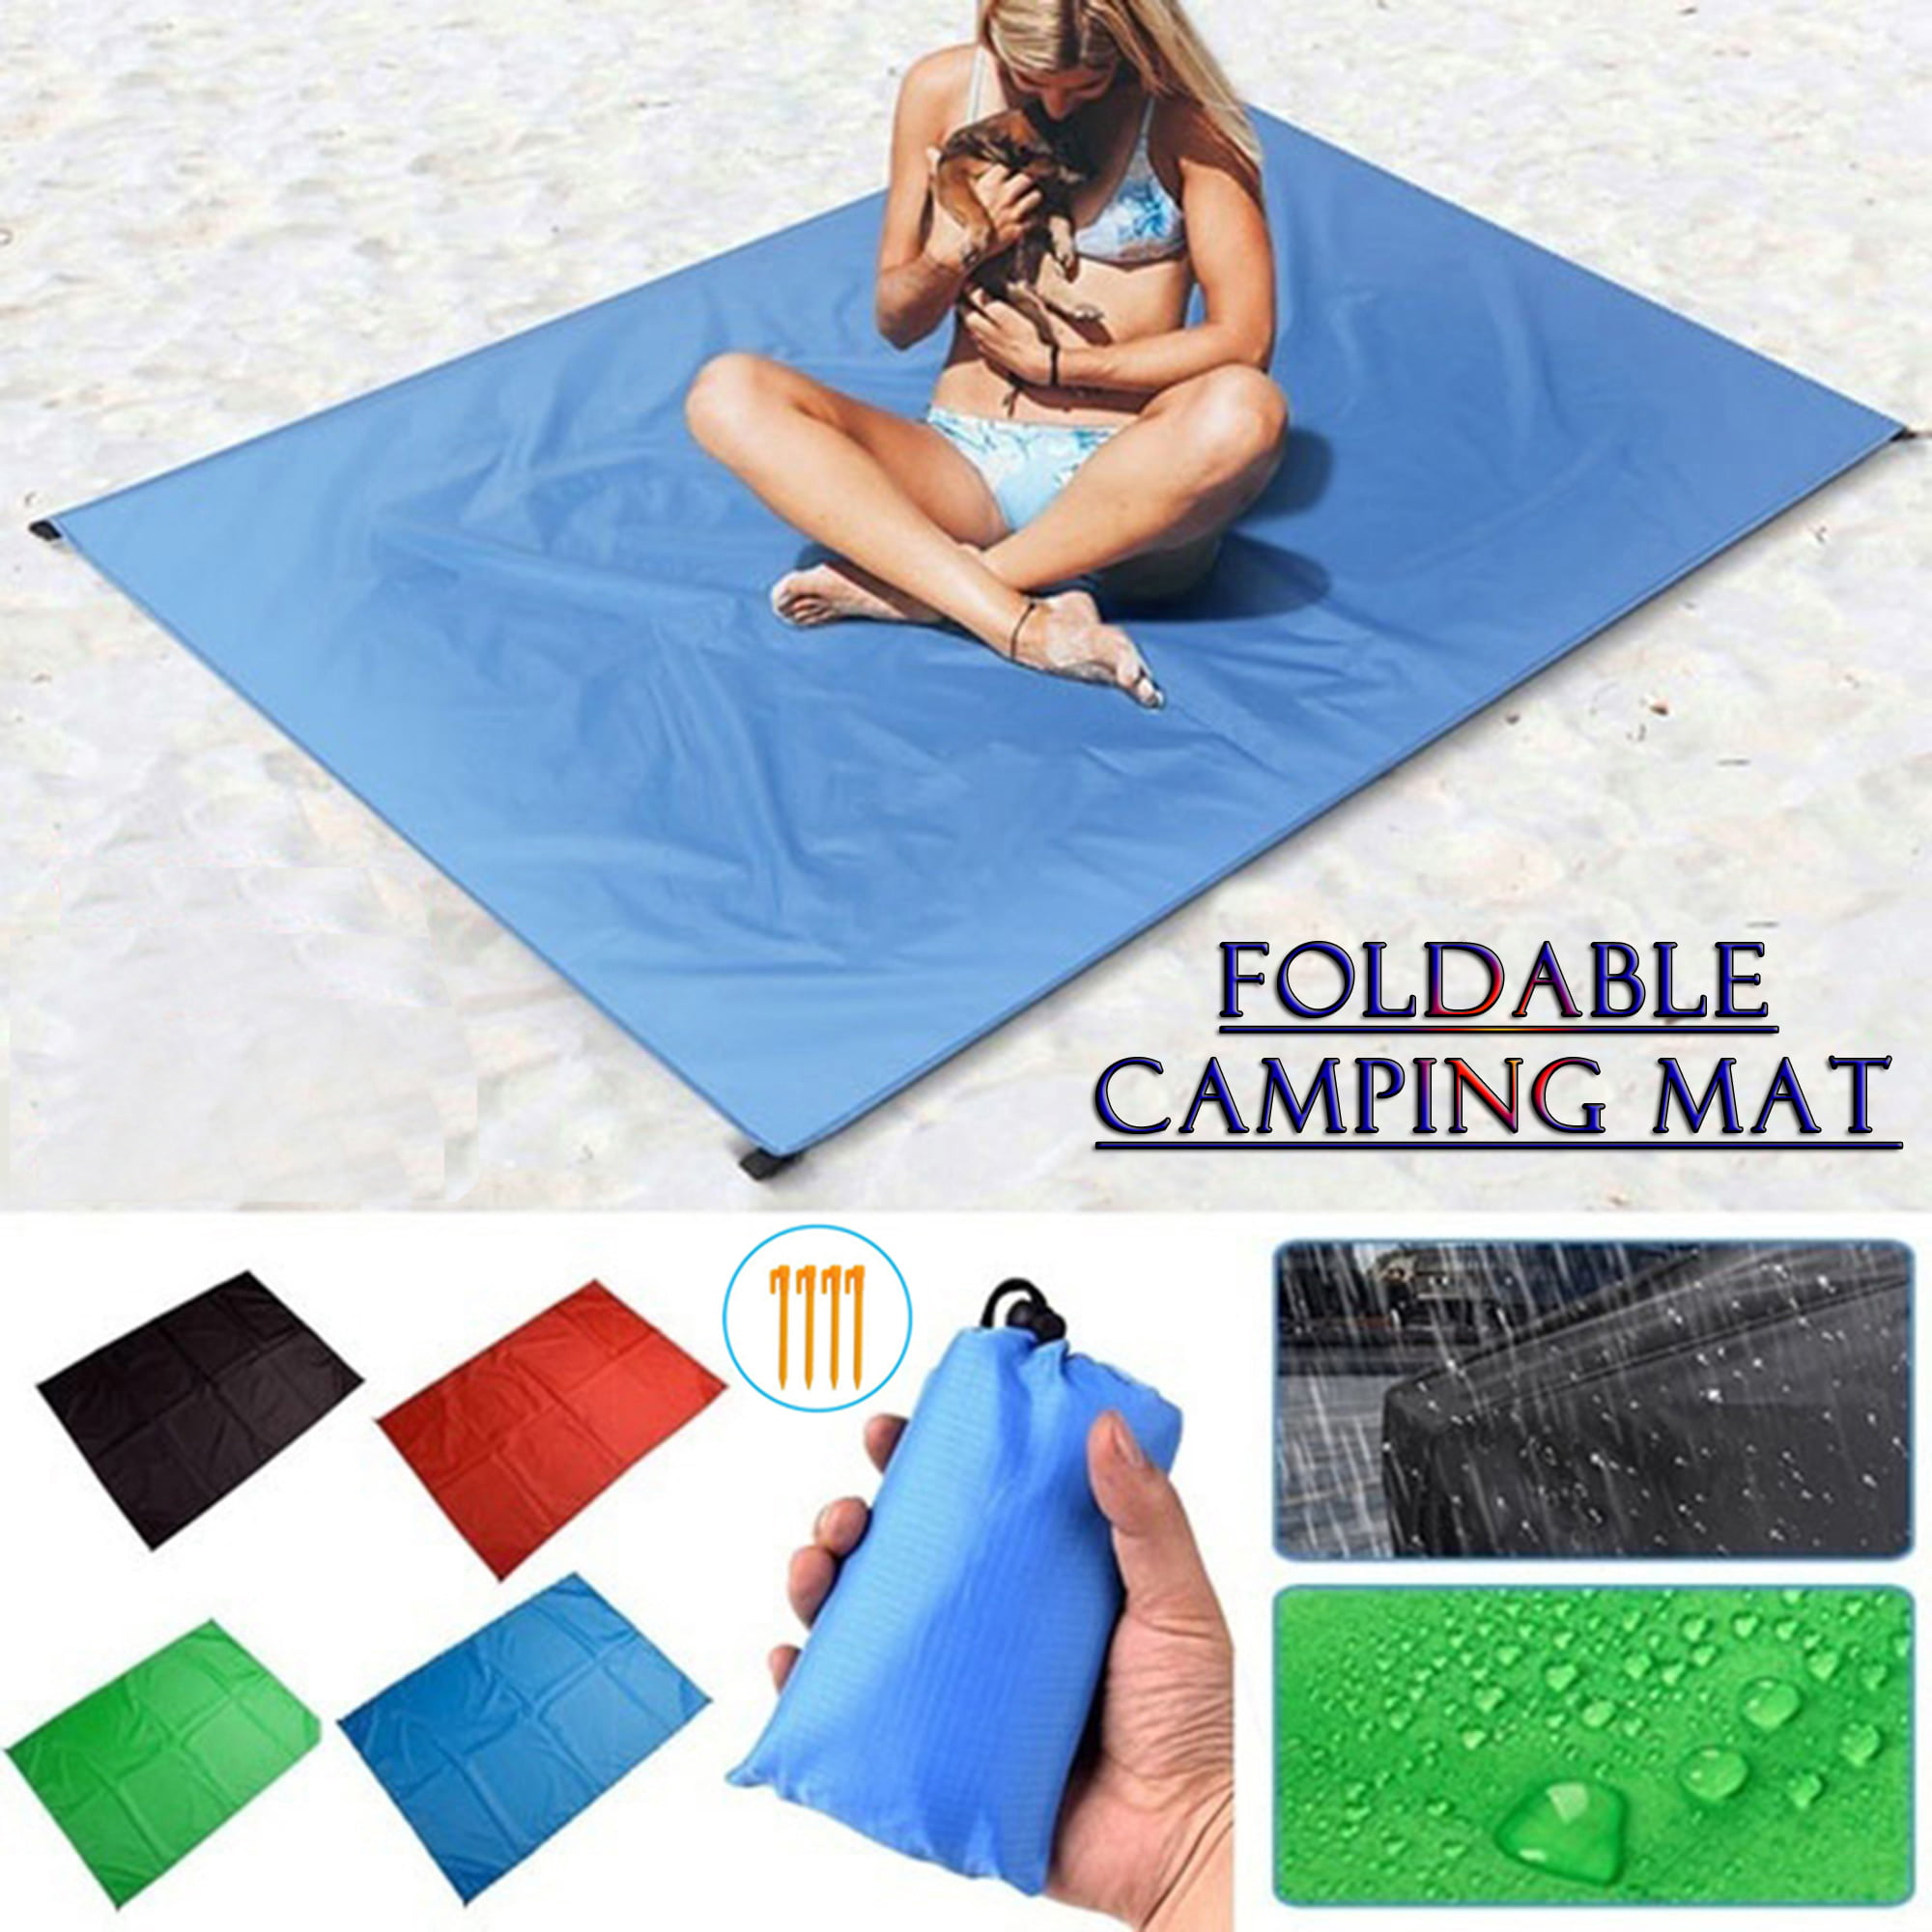 78x55 Compact Beach Mat Lightweight with Carry Pouch Waterproof Sand Free 62x43 Gonex Sand Proof Beach Blanket Stakes Carabiner for Outdoor 